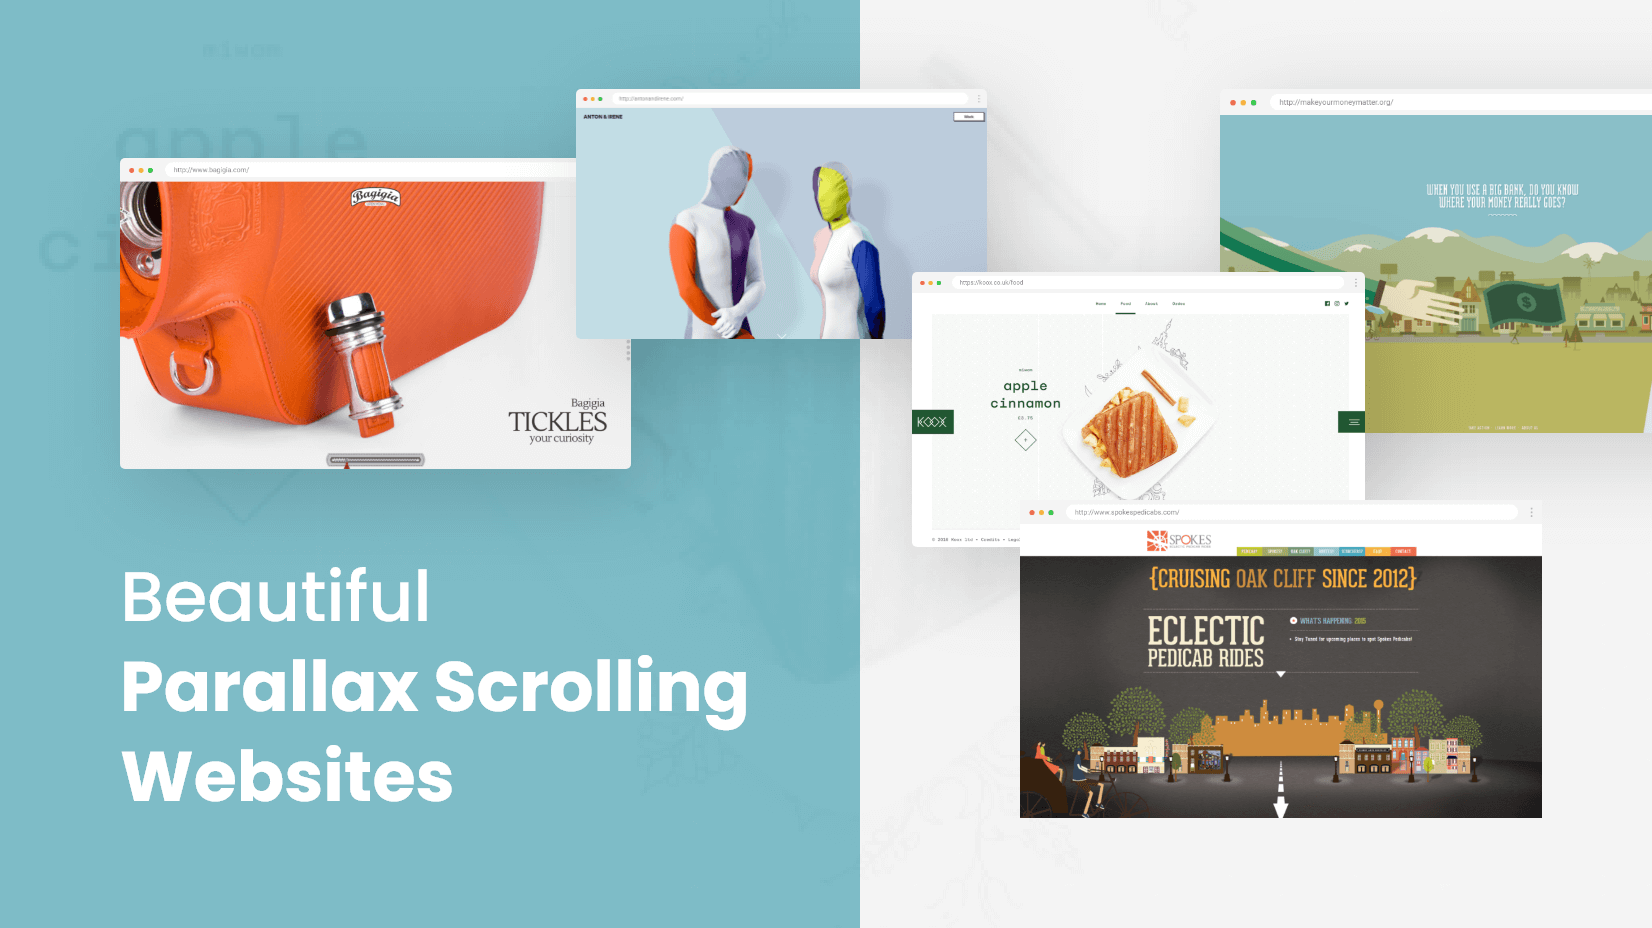 free-parallax-scrolling-website-template-psd-for-responsive-parallax